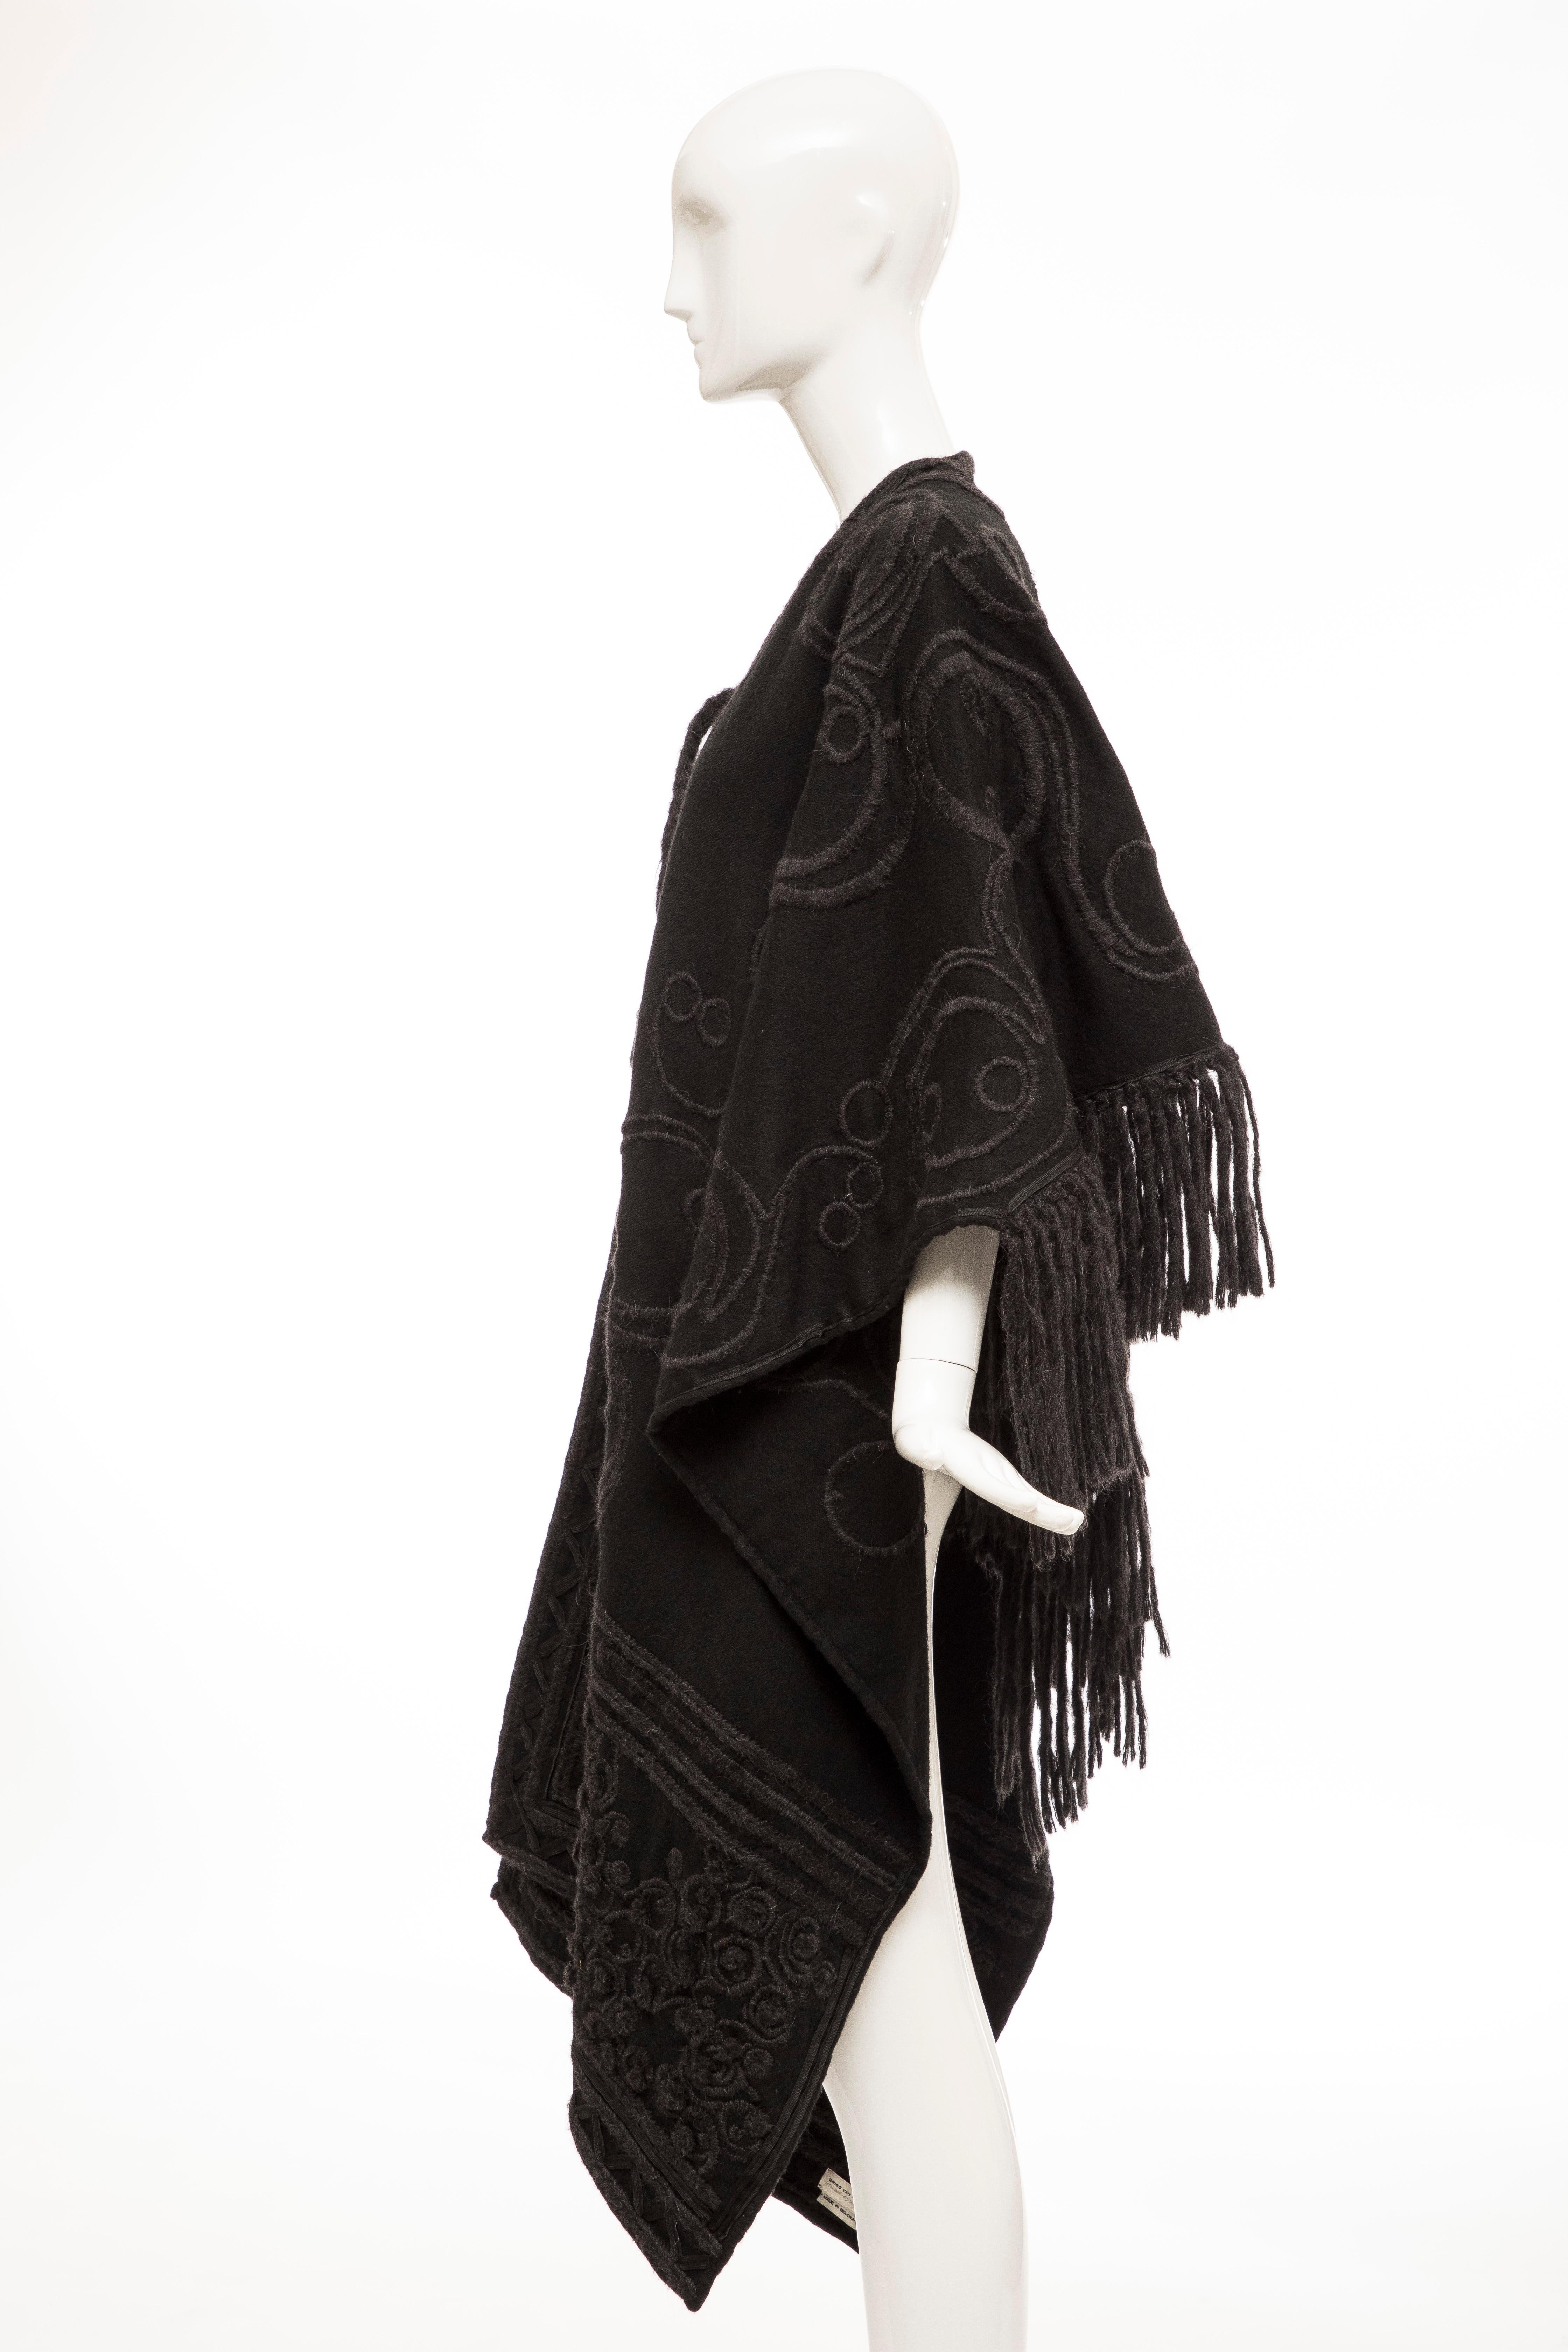 Dries Van Noten Runway Black Wool Embroidered Fringe Cape, Fall 2002 For Sale 6